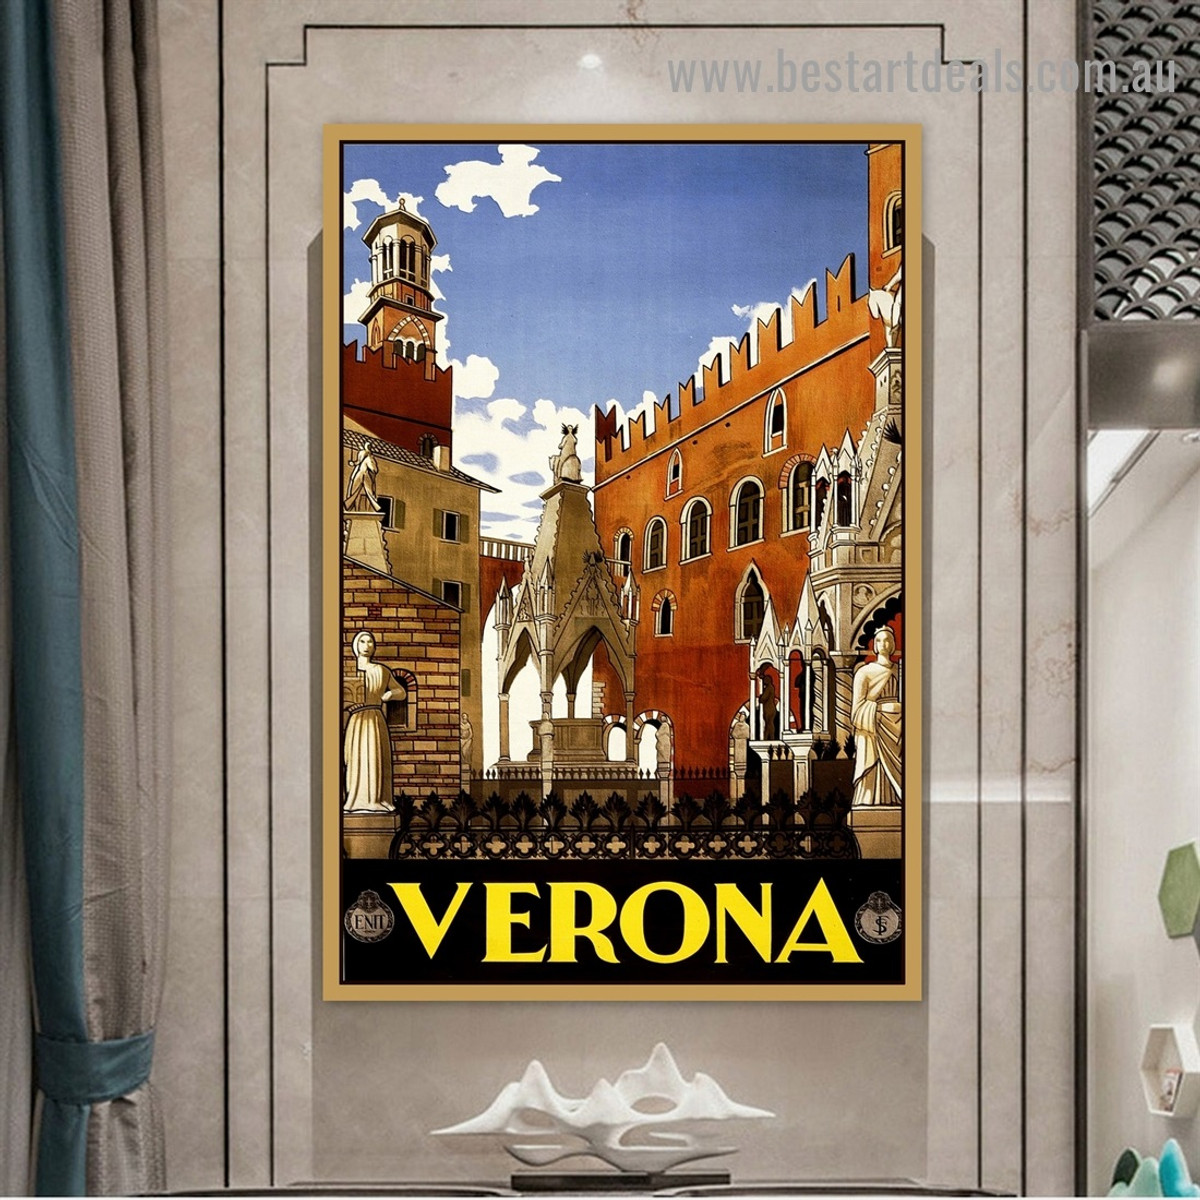 Verona Travel City Vintage Reproduction Advertisement Artwork Picture Canvas Print for Room Wall Ornament